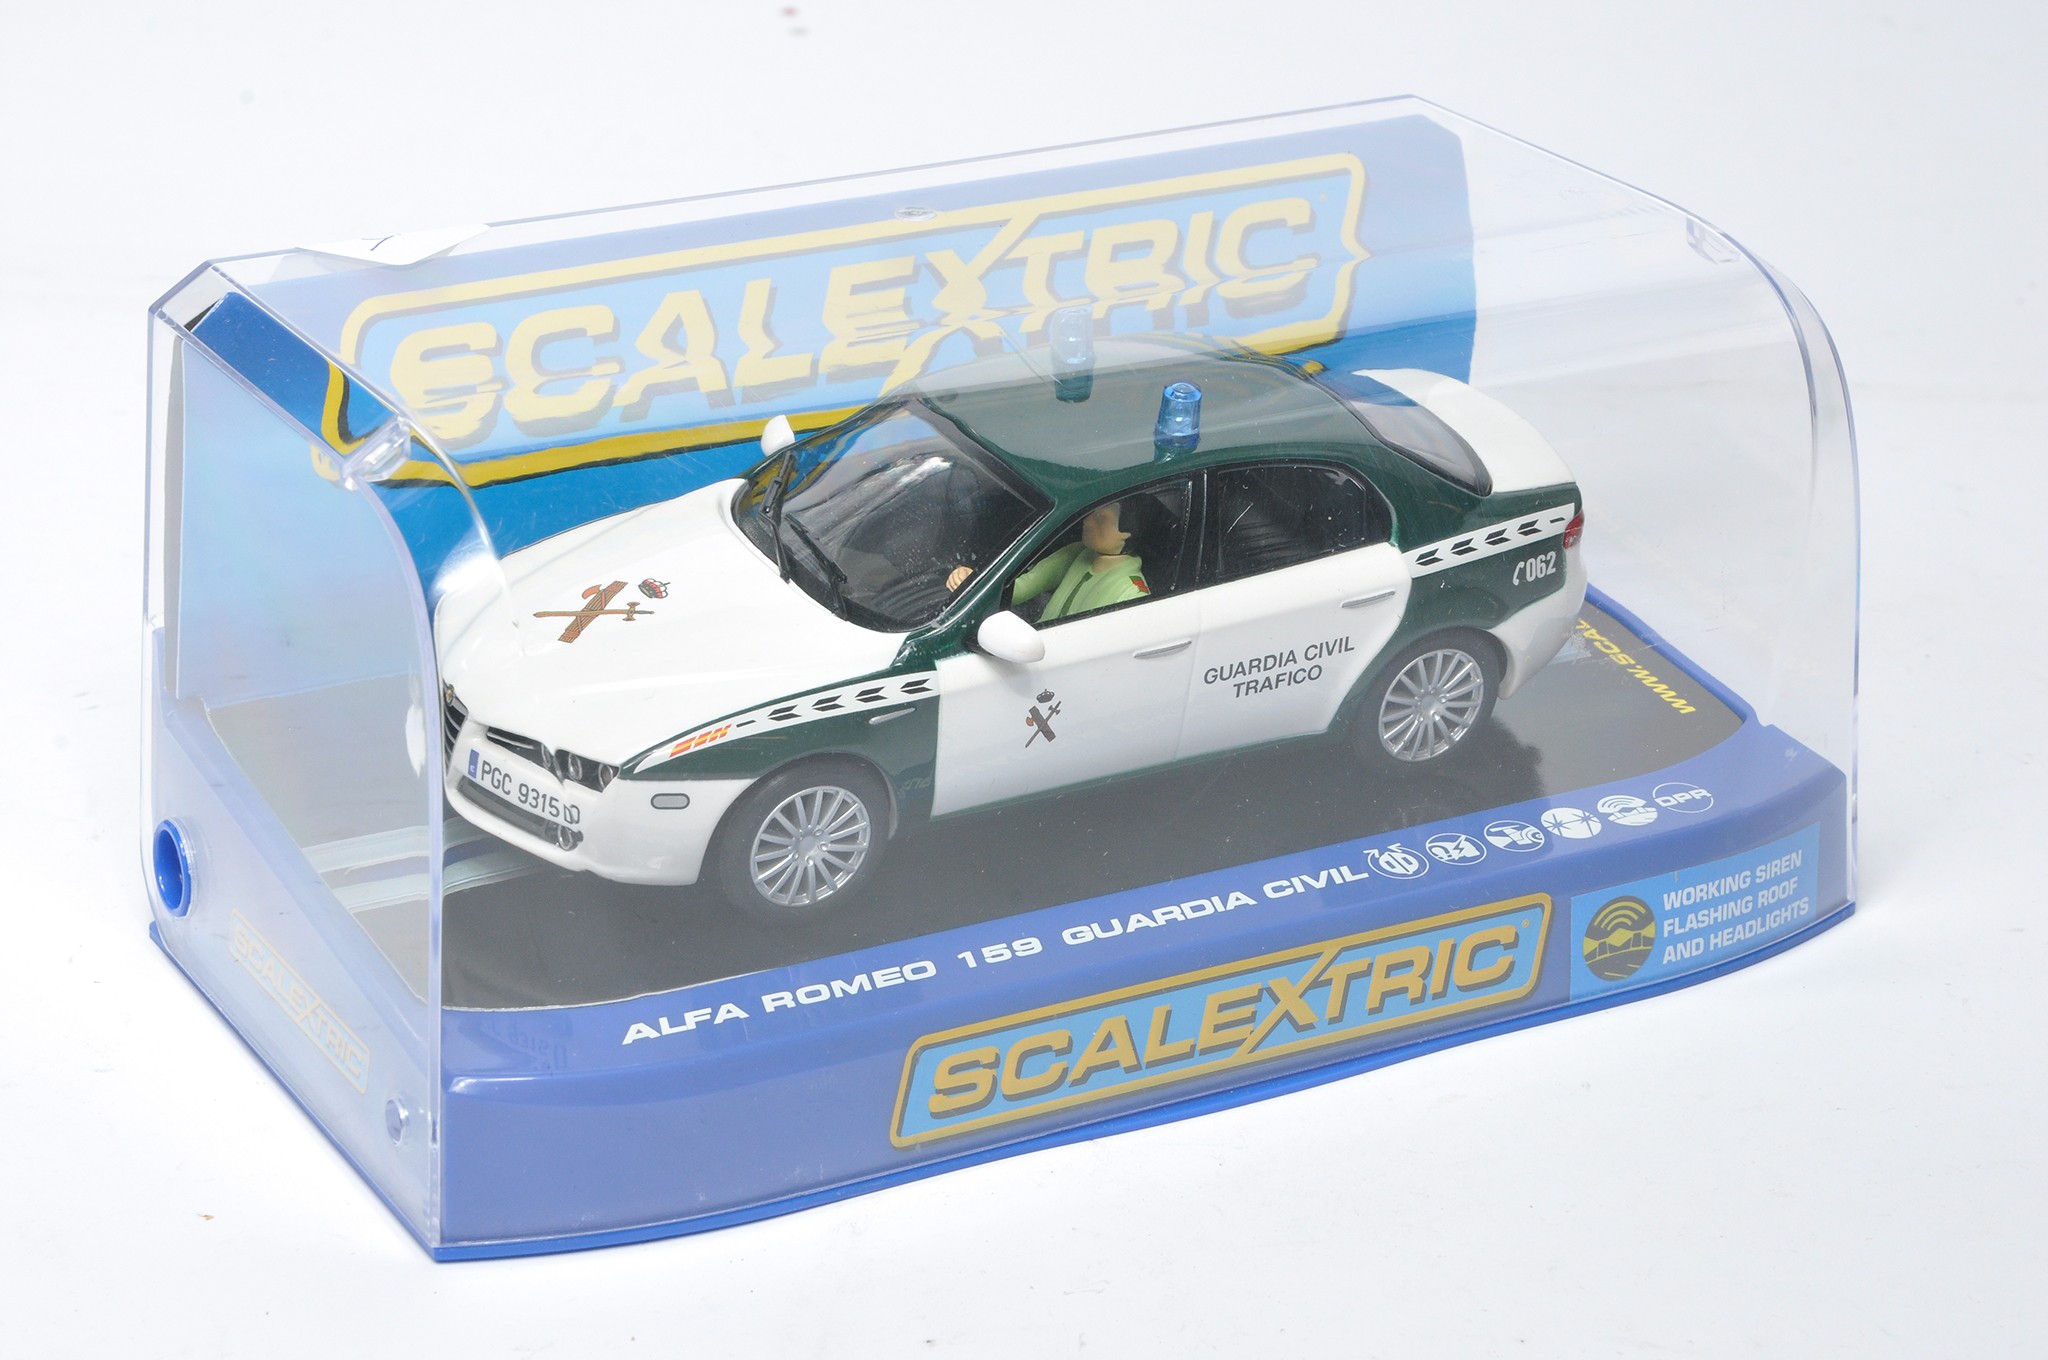 Scalextric slot car issue Alfa Romeo 159 Guardia Civil Trafico - working siren, flashing roof and